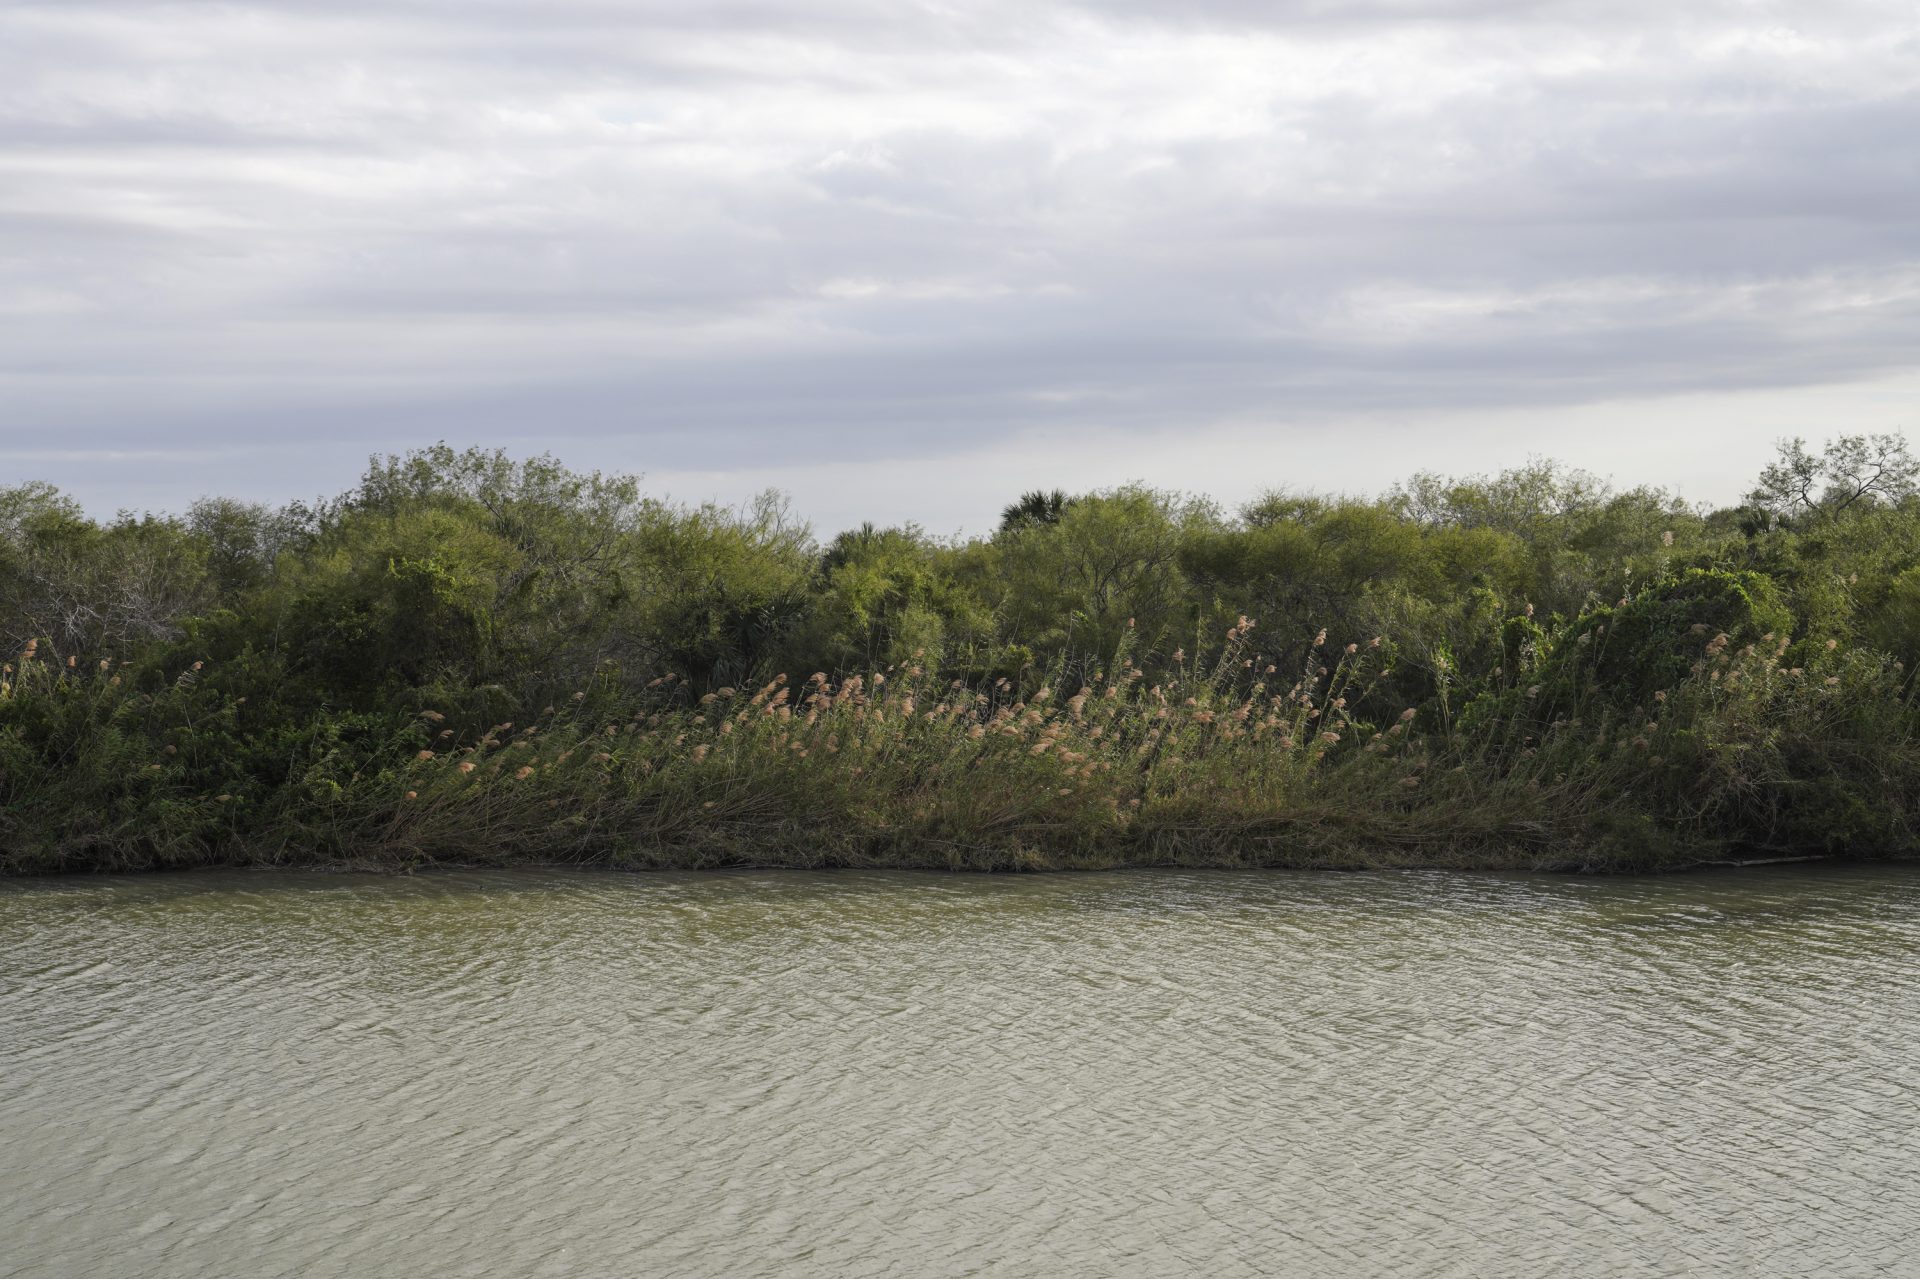 Mexico is seen across the Rio Grande from Brownsville, Texas.The Rio Grande Valley is where four climates converge--temperate, desert, coastal and sub-tropical--which has created rich biodiversity. .